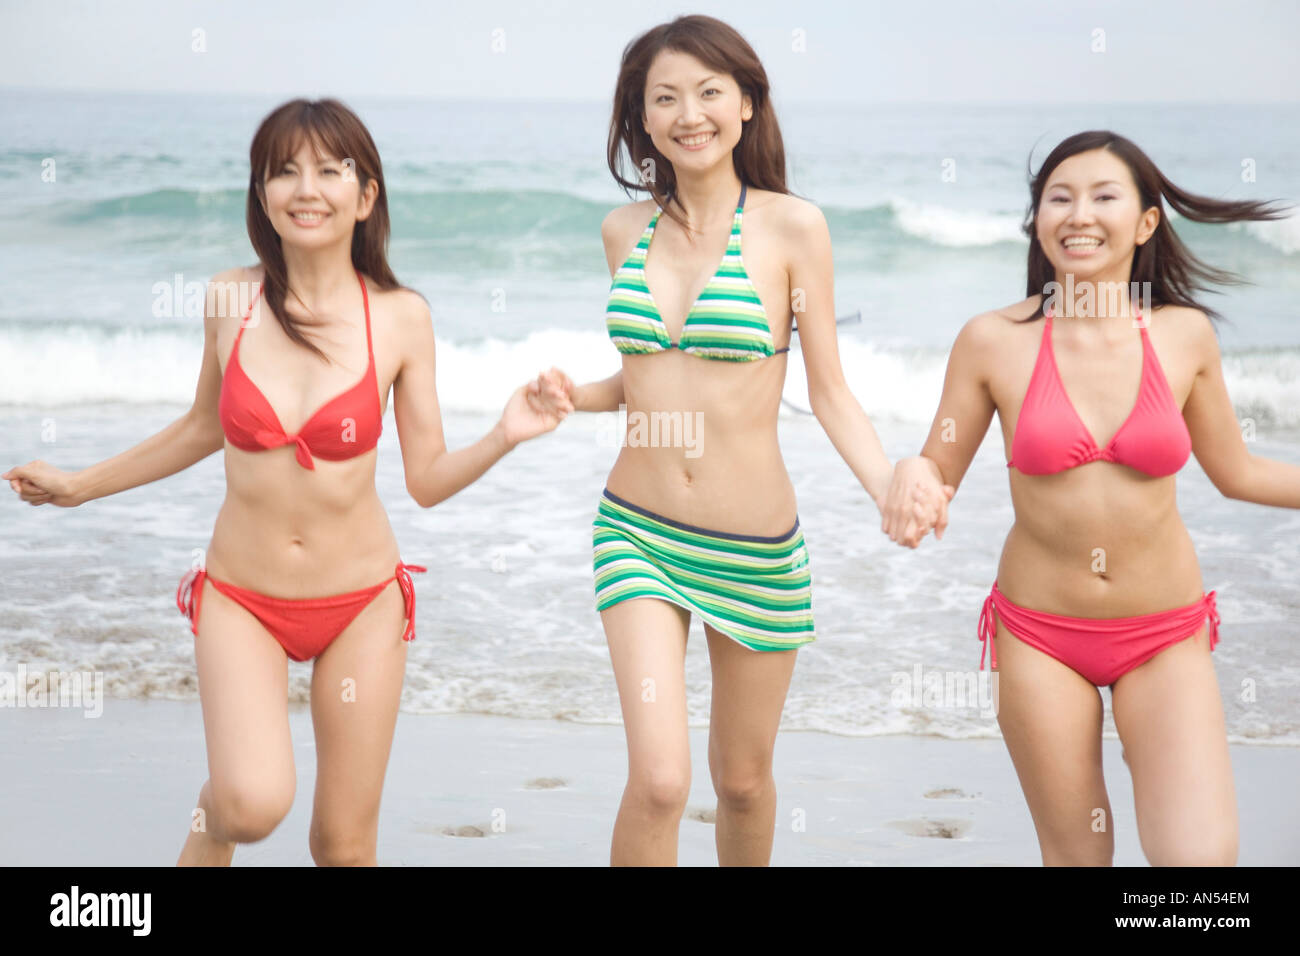 Japanese Beach Girls All Ages